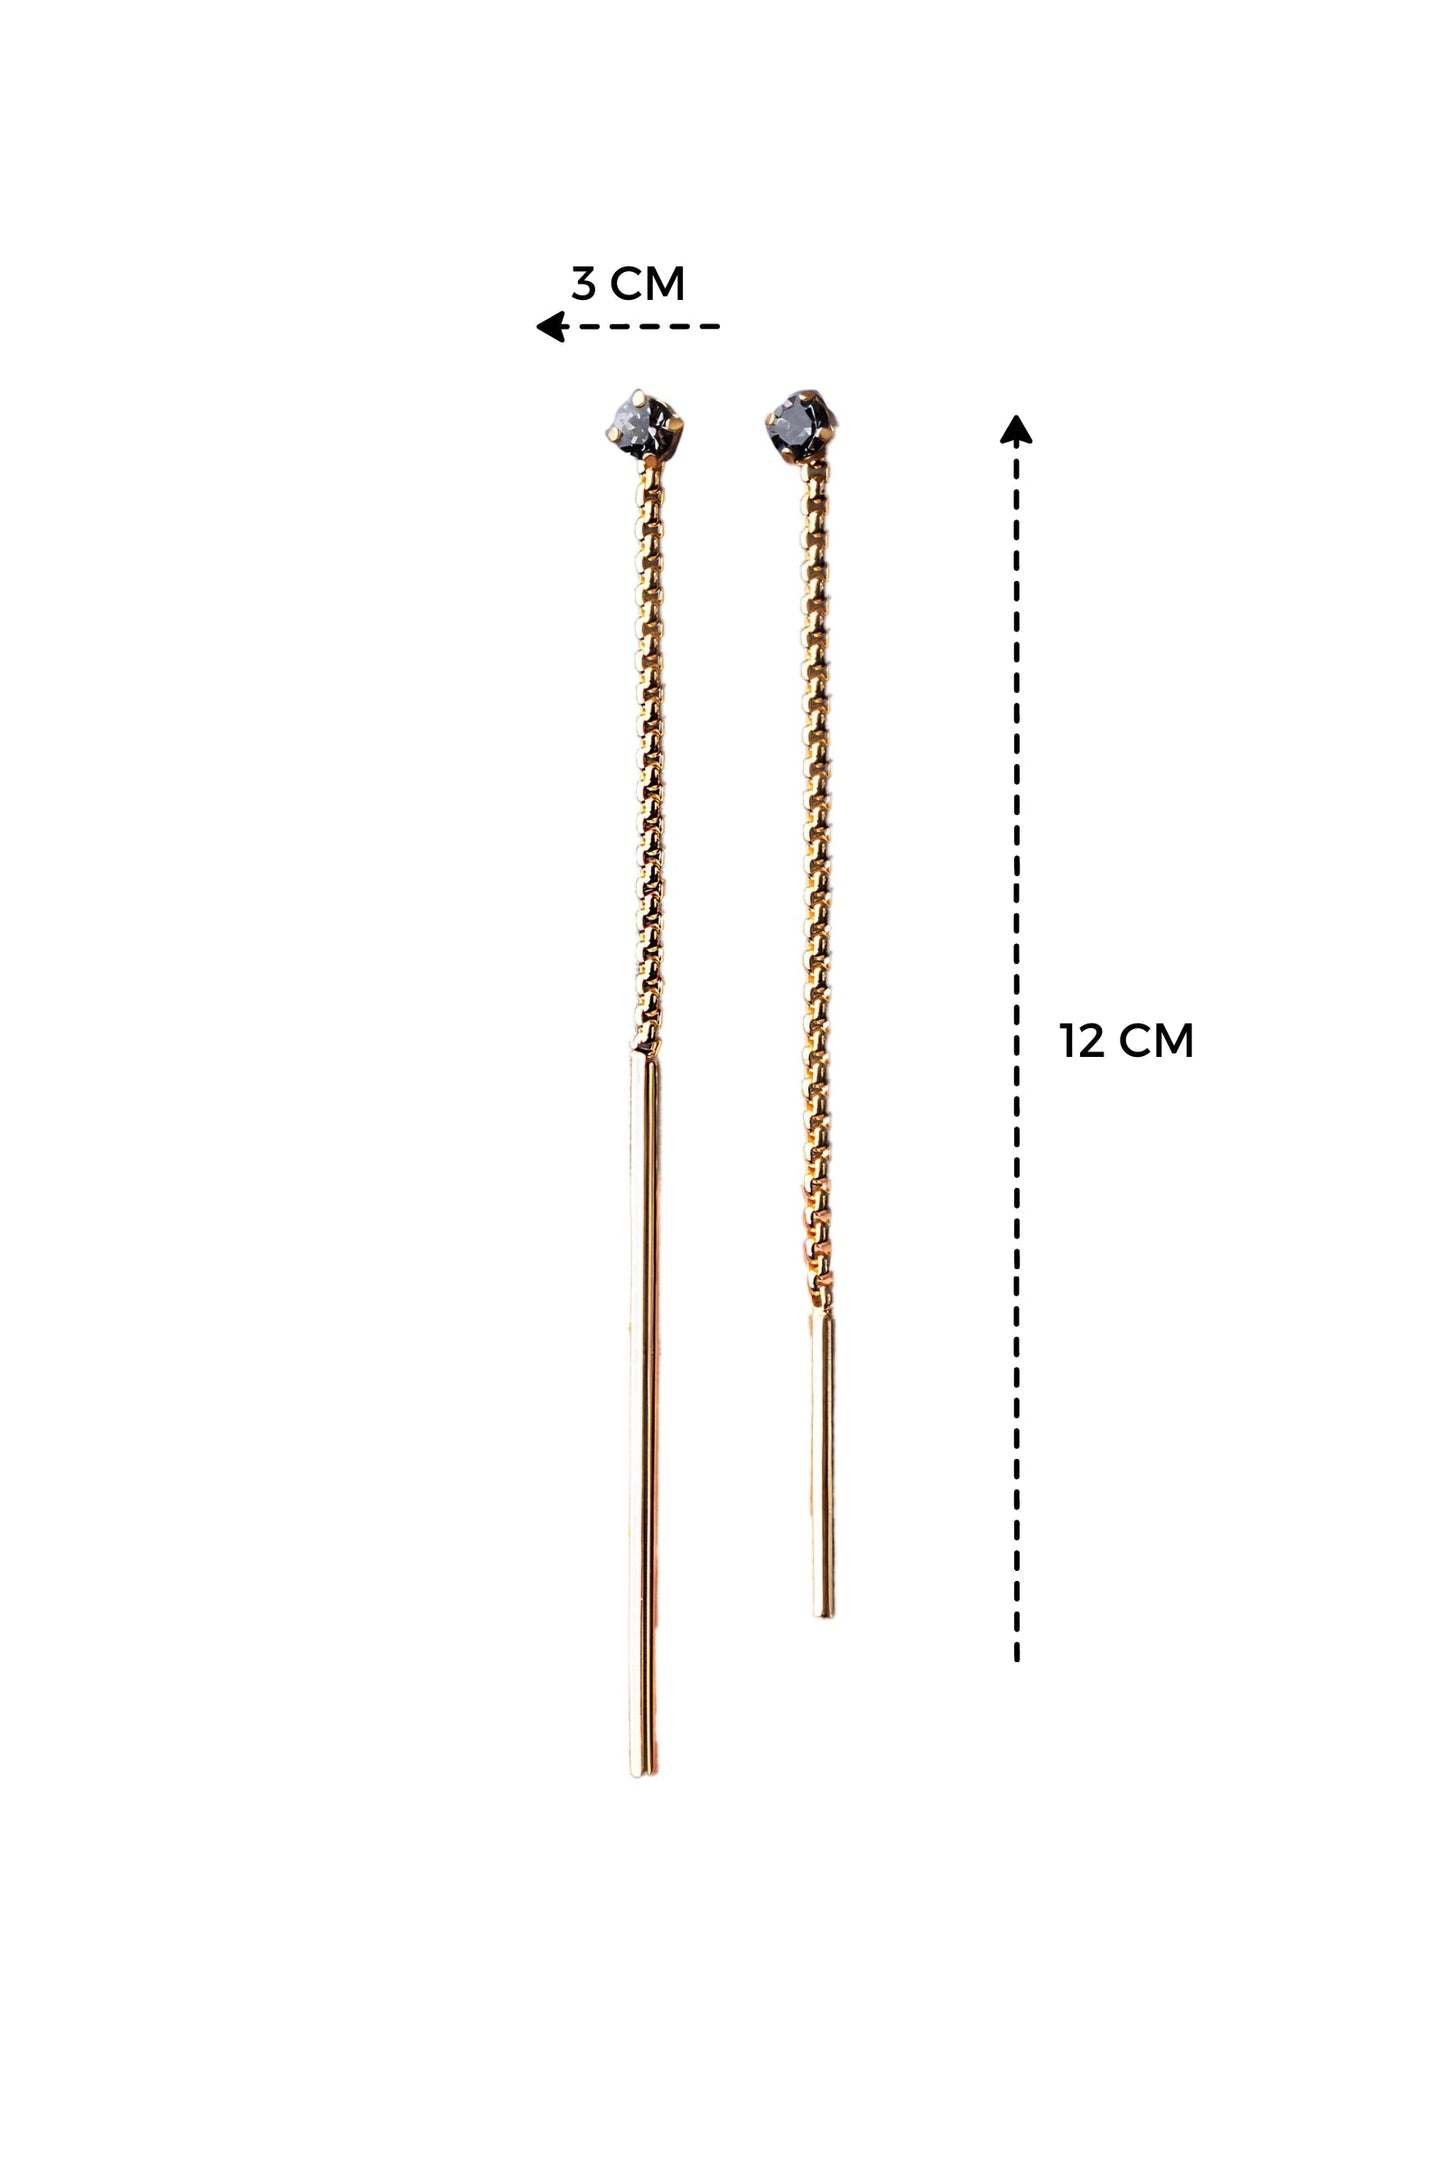 a pair of earrings with measurements for each ear